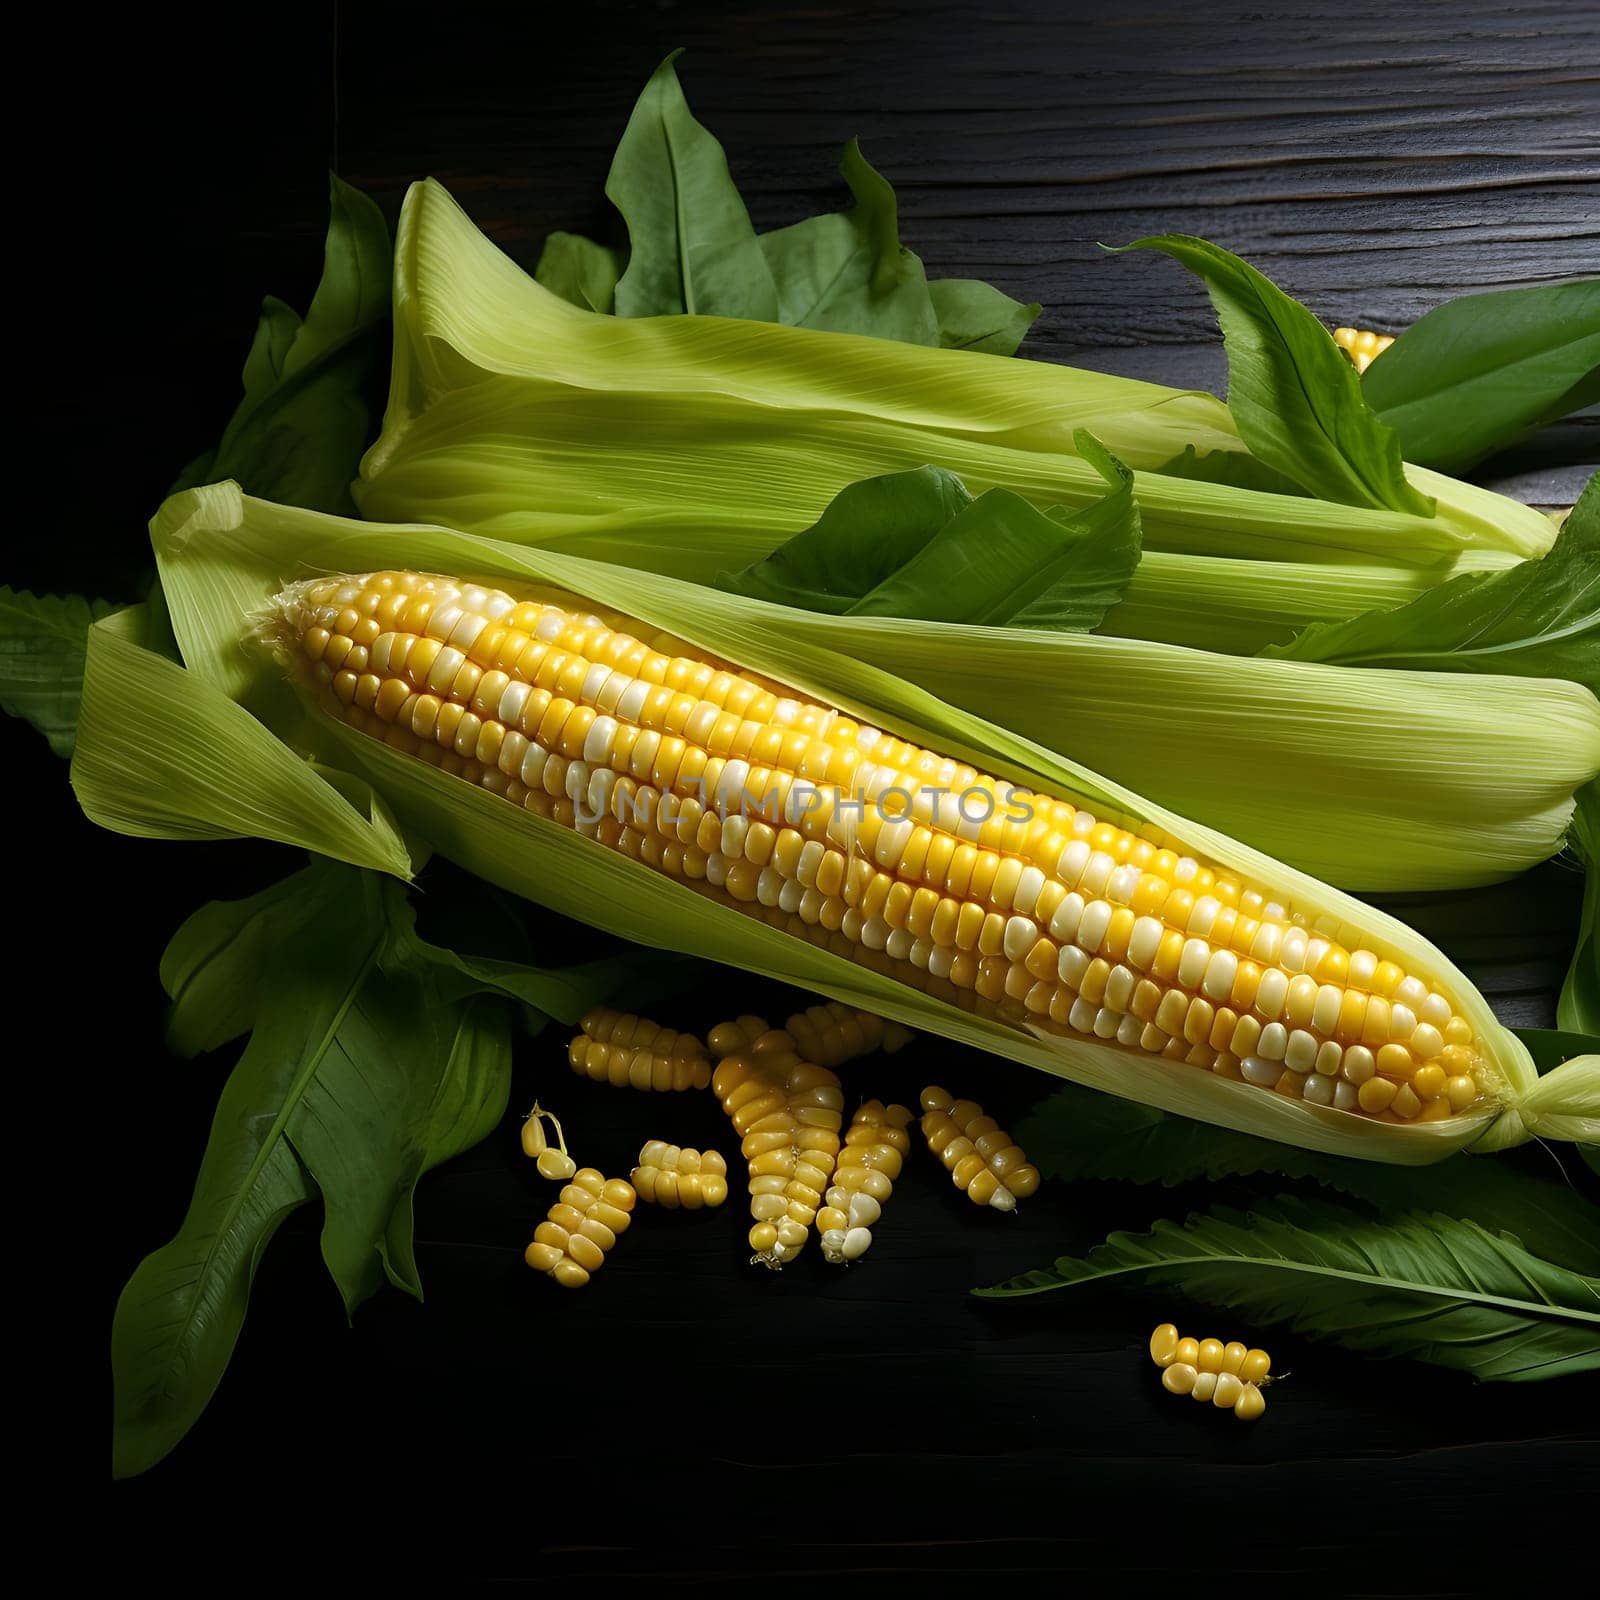 Yellow-white kernels in a corn cob arranged on leaves. Corn as a dish of thanksgiving for the harvest. An atmosphere of joy and celebration.